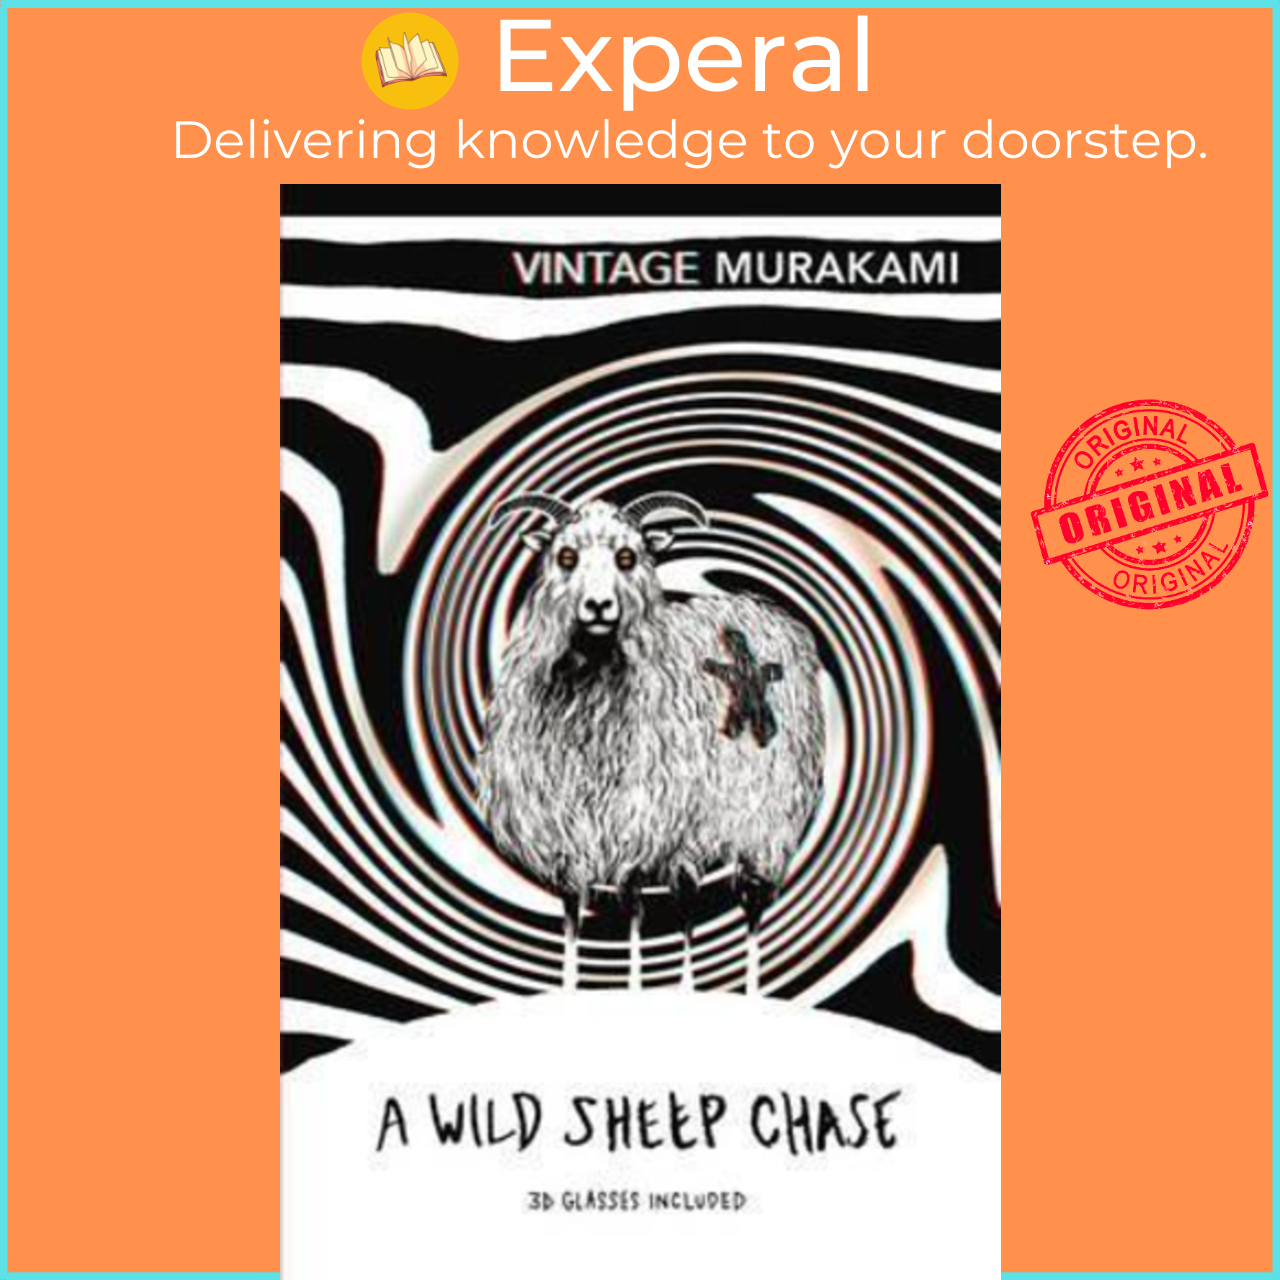 paperback)　A　edition,　by　(UK　Chase　Wild　3D　Sheep　Special　Murakami　Lazada　Edition　Haruki　Singapore